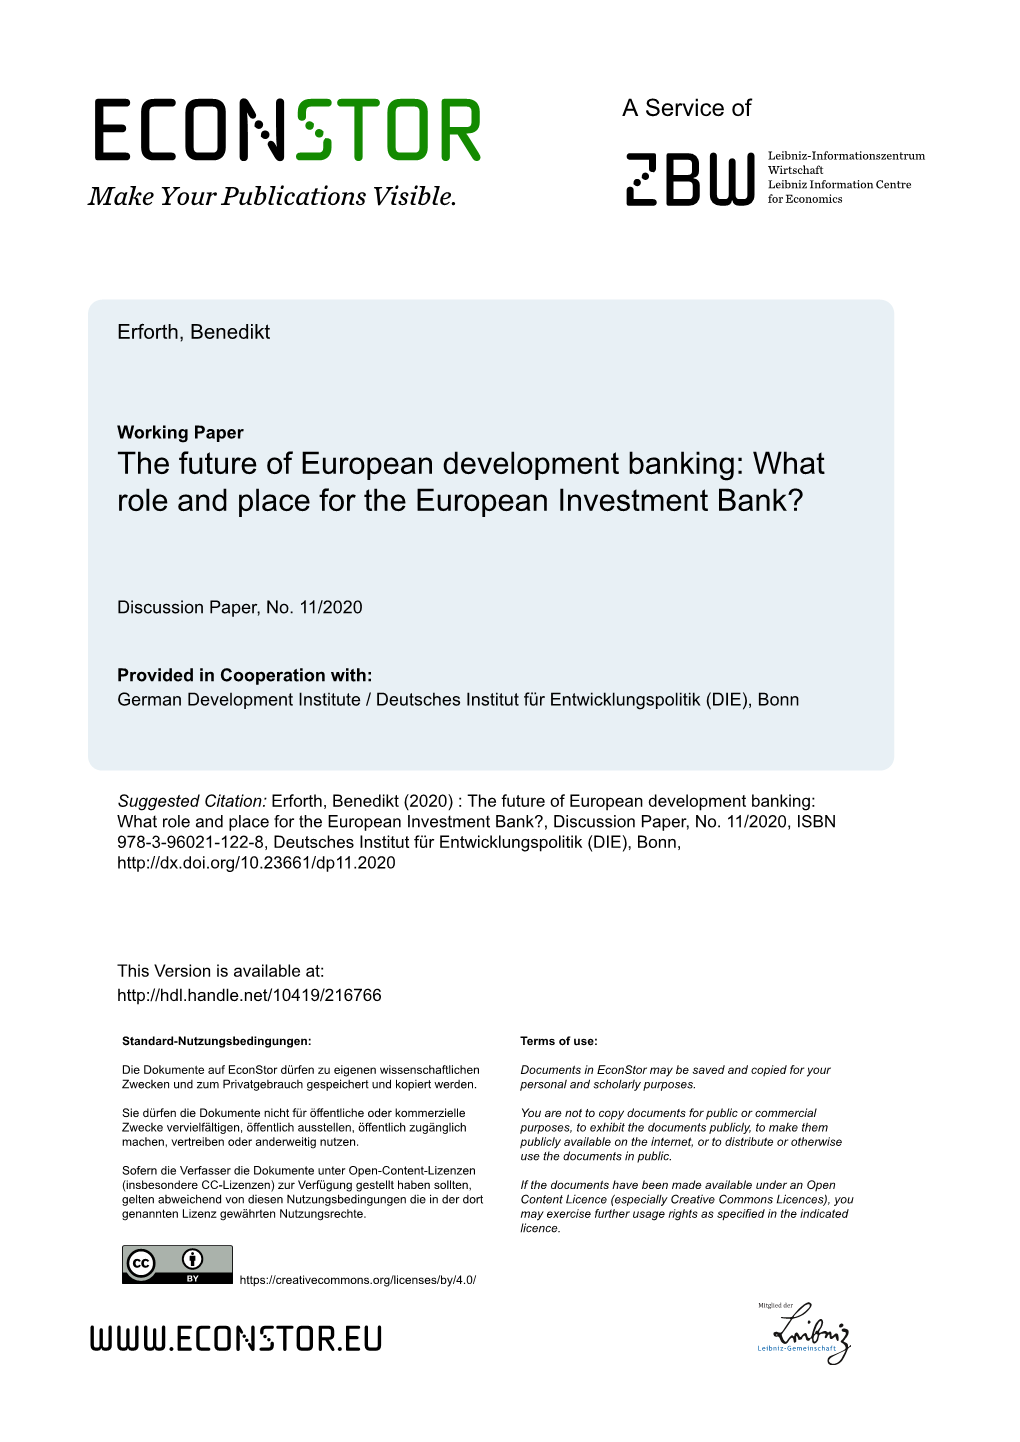 What Role and Place for the European Investment Bank?